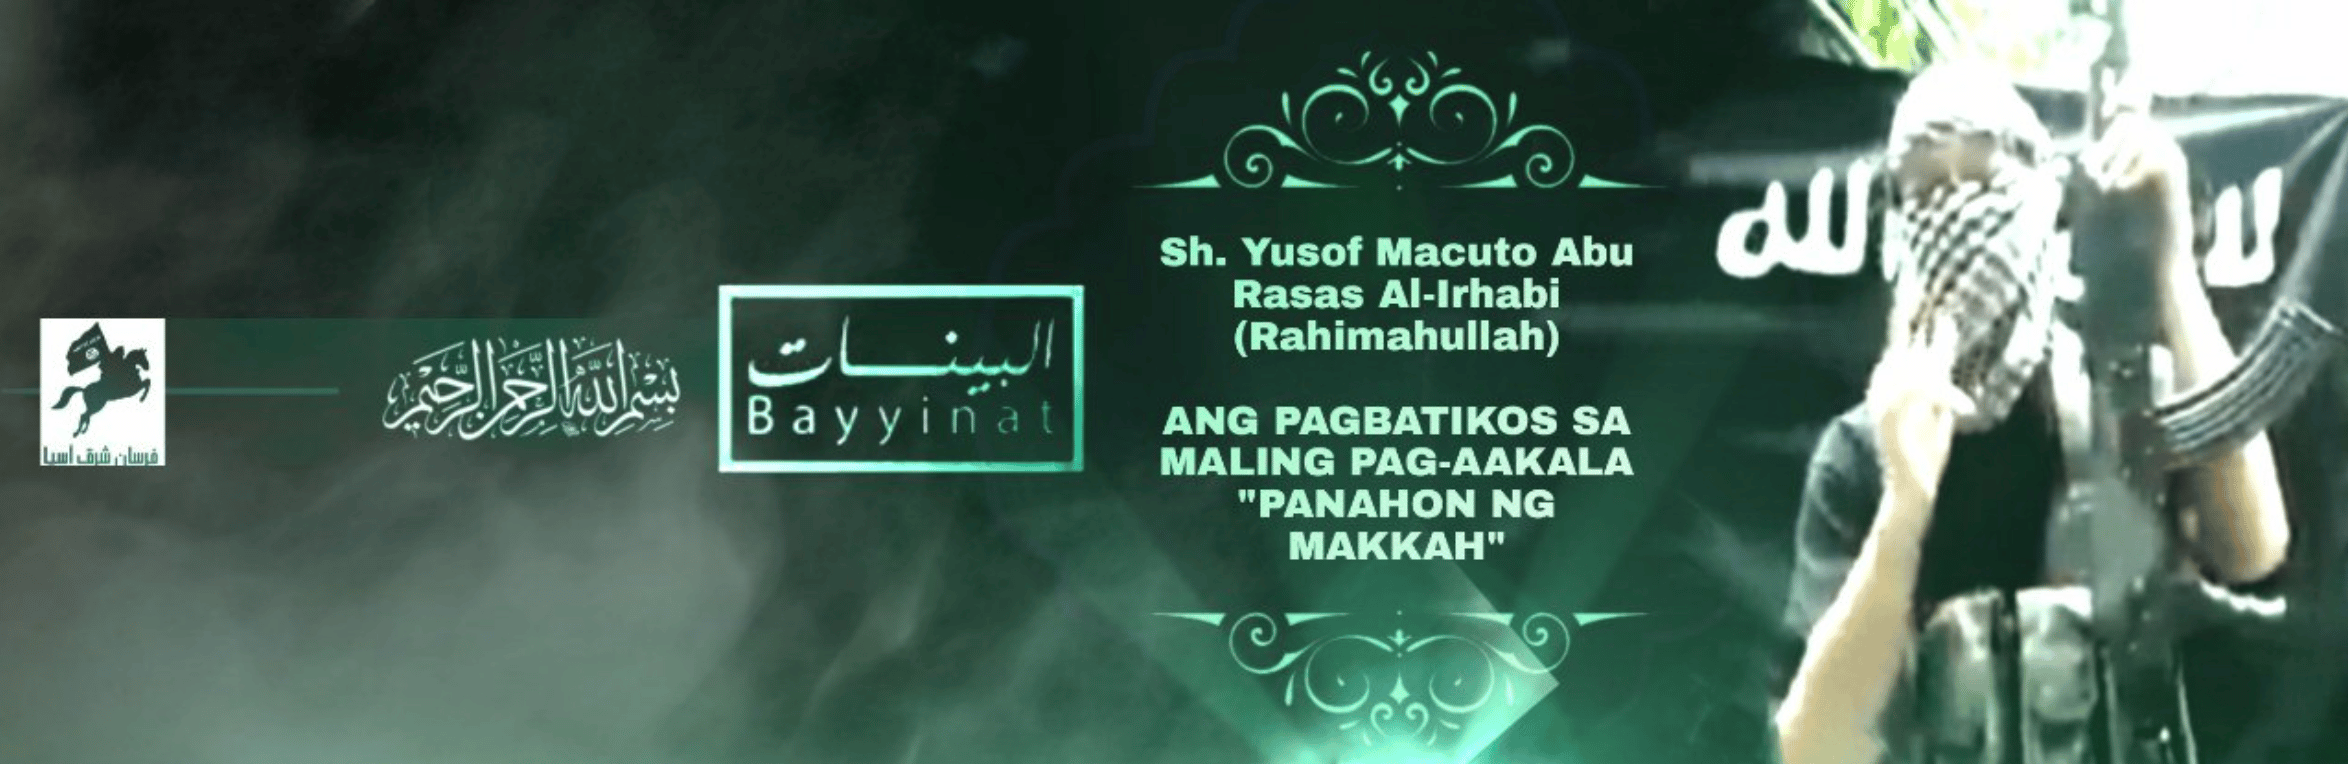 (Video) Unofficial Islamic State East Asia (ISEA) East Asia Knights Media Label: Sh. Yusof Macuto Abu Rasas Al-Irhabi "The Criticism of Misconception" - 21 March 2022